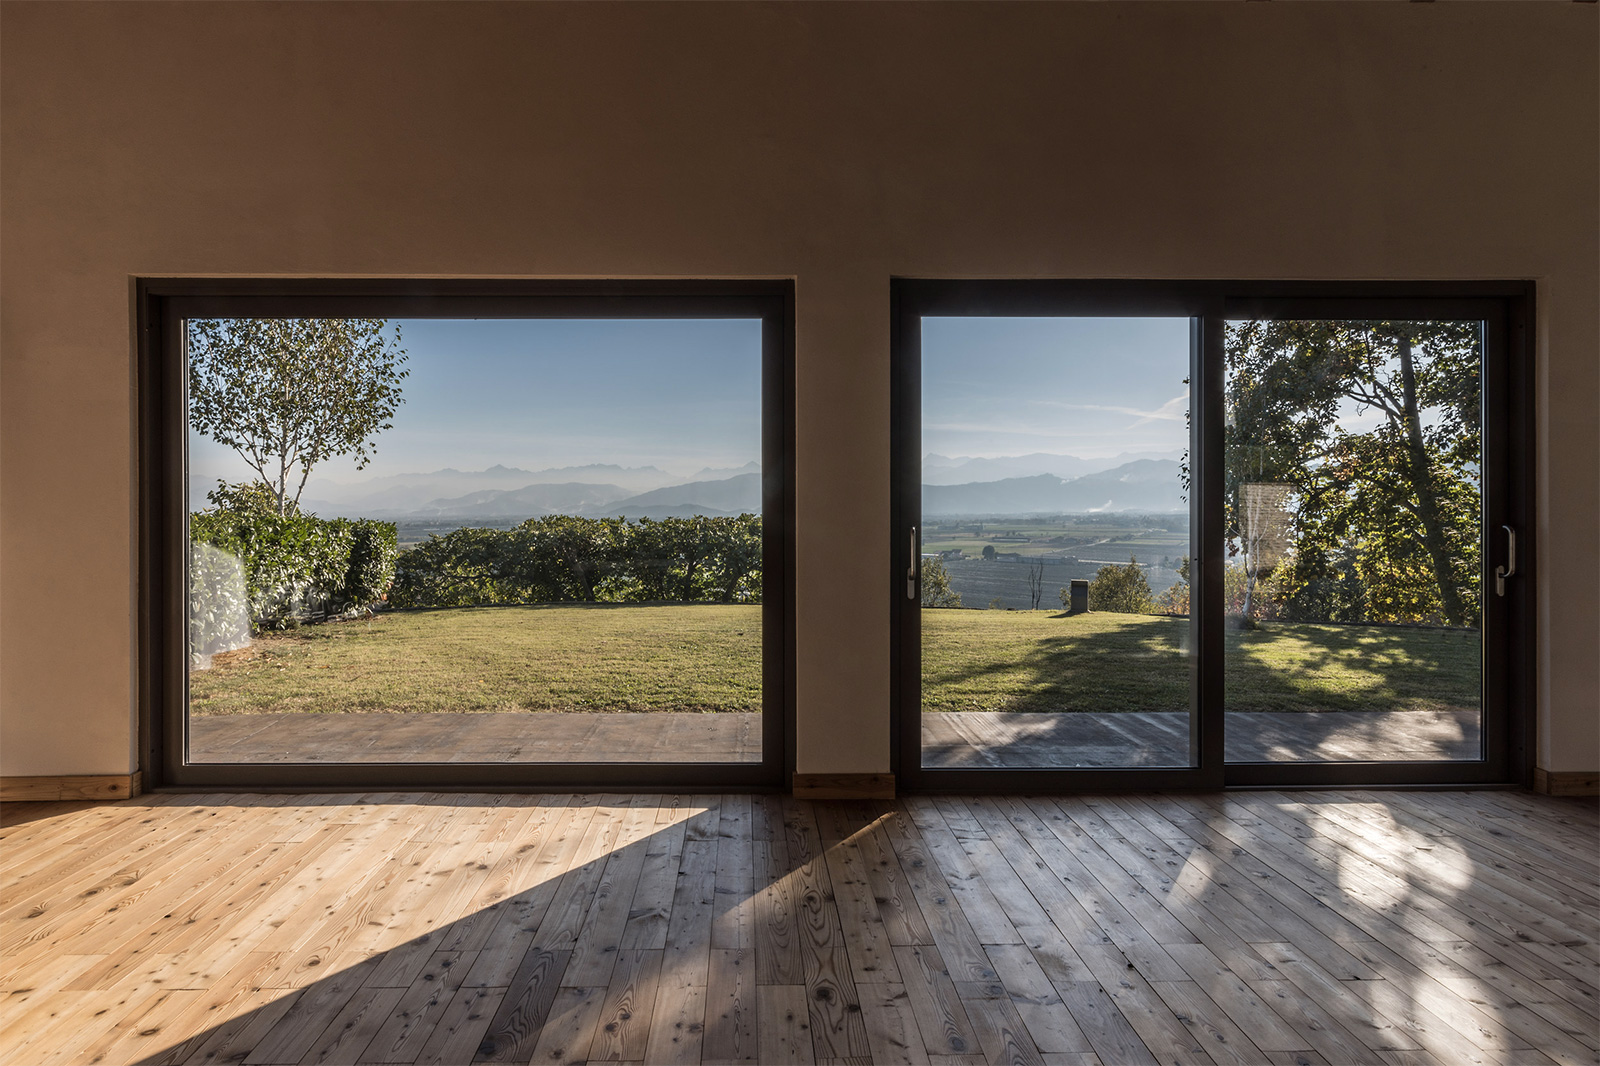 Villa con Vista: a simple interior palette of white walls and raw timber floors doesn't detract from the views